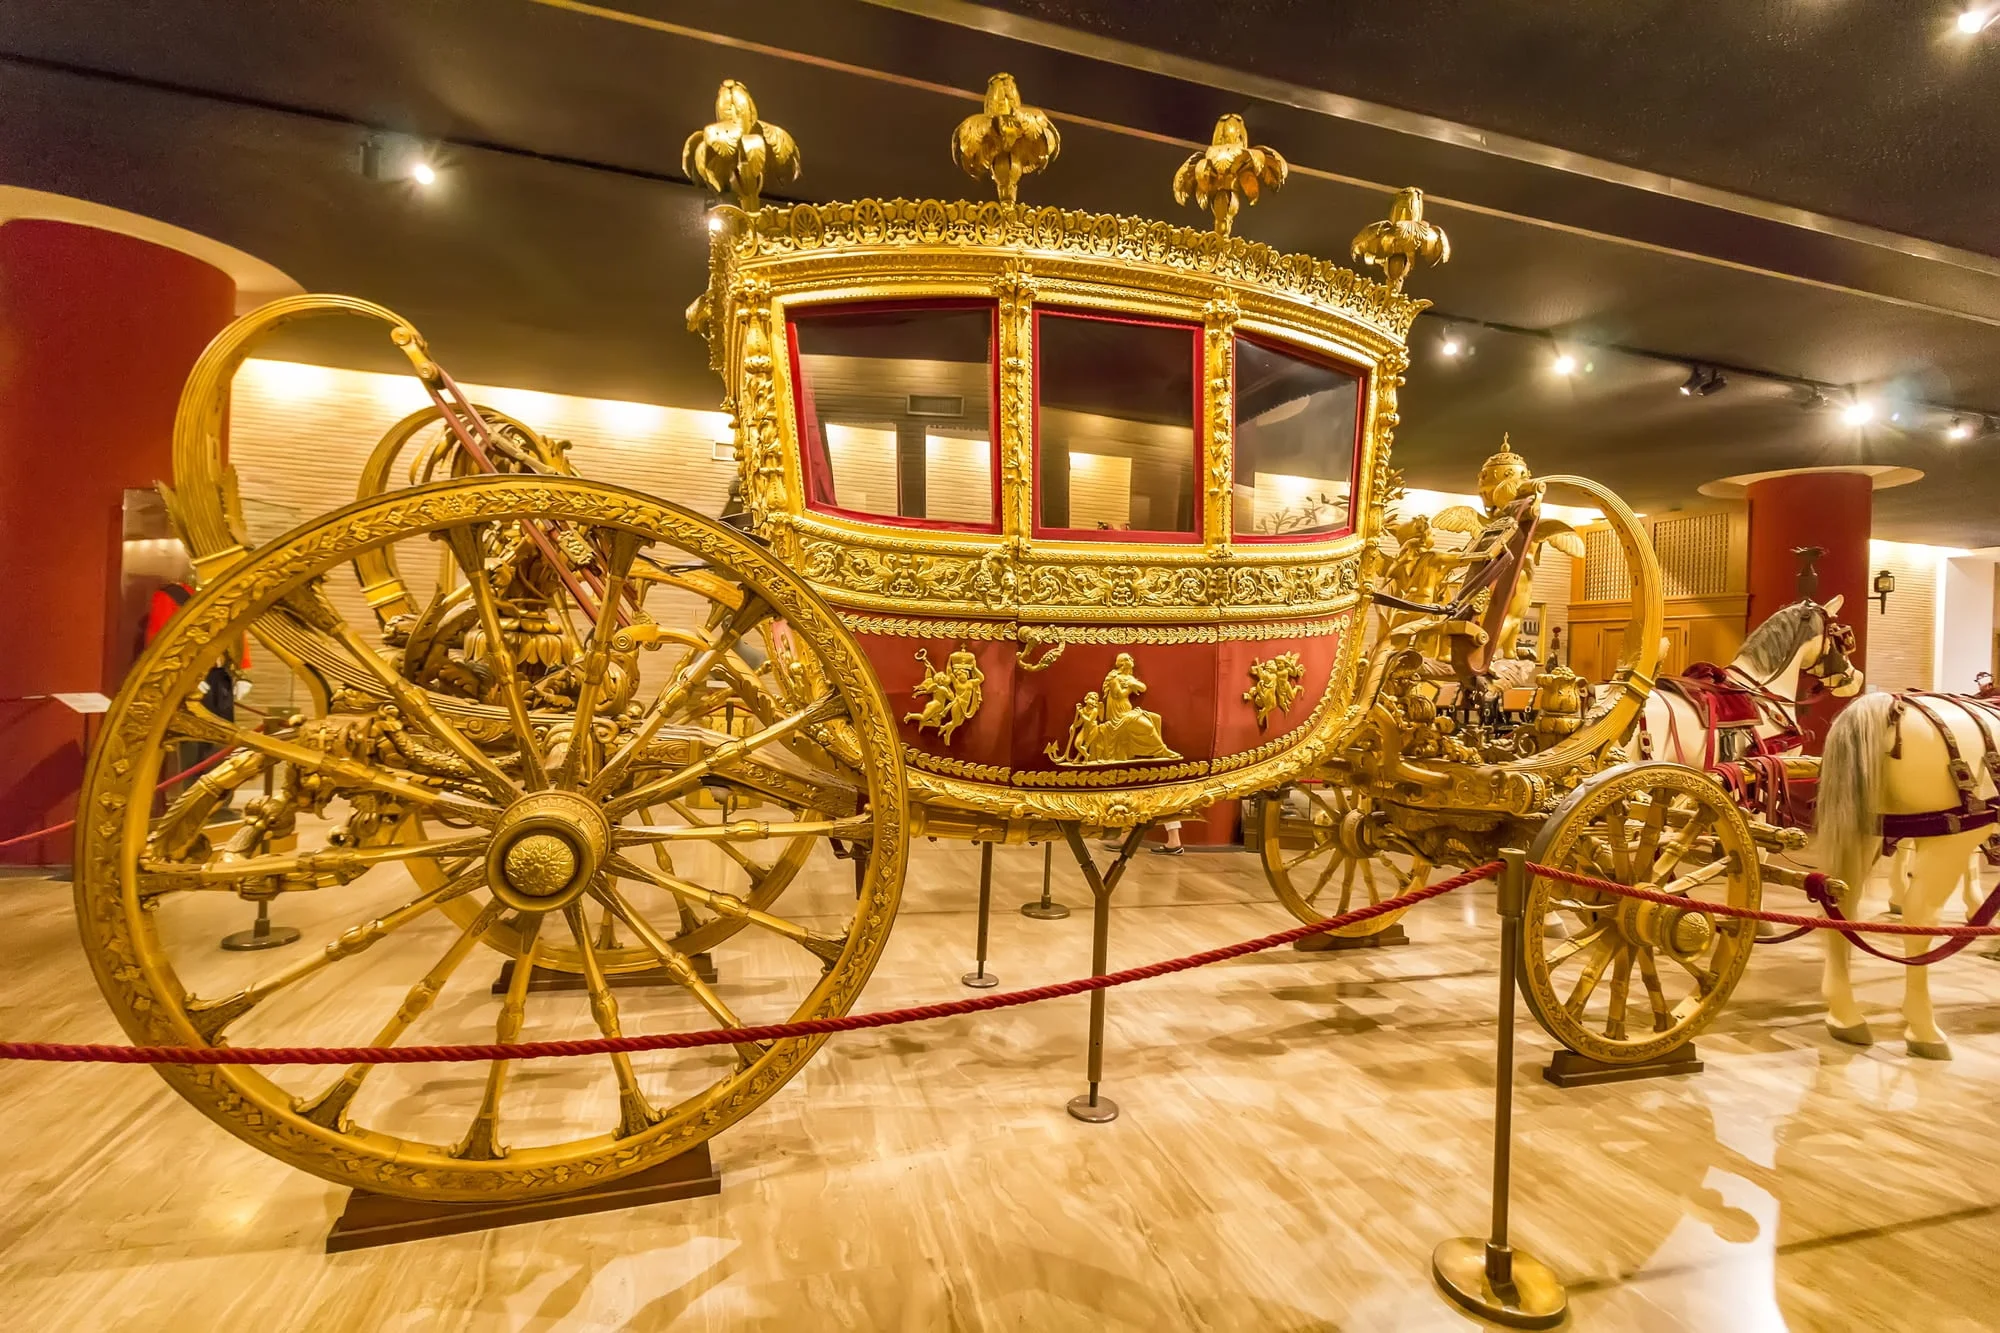 VATIKANETS MUSEUM. Carriage in the Hall of the historic transportation vehicles of the Pope, Vatican Museum. It was established in 1506